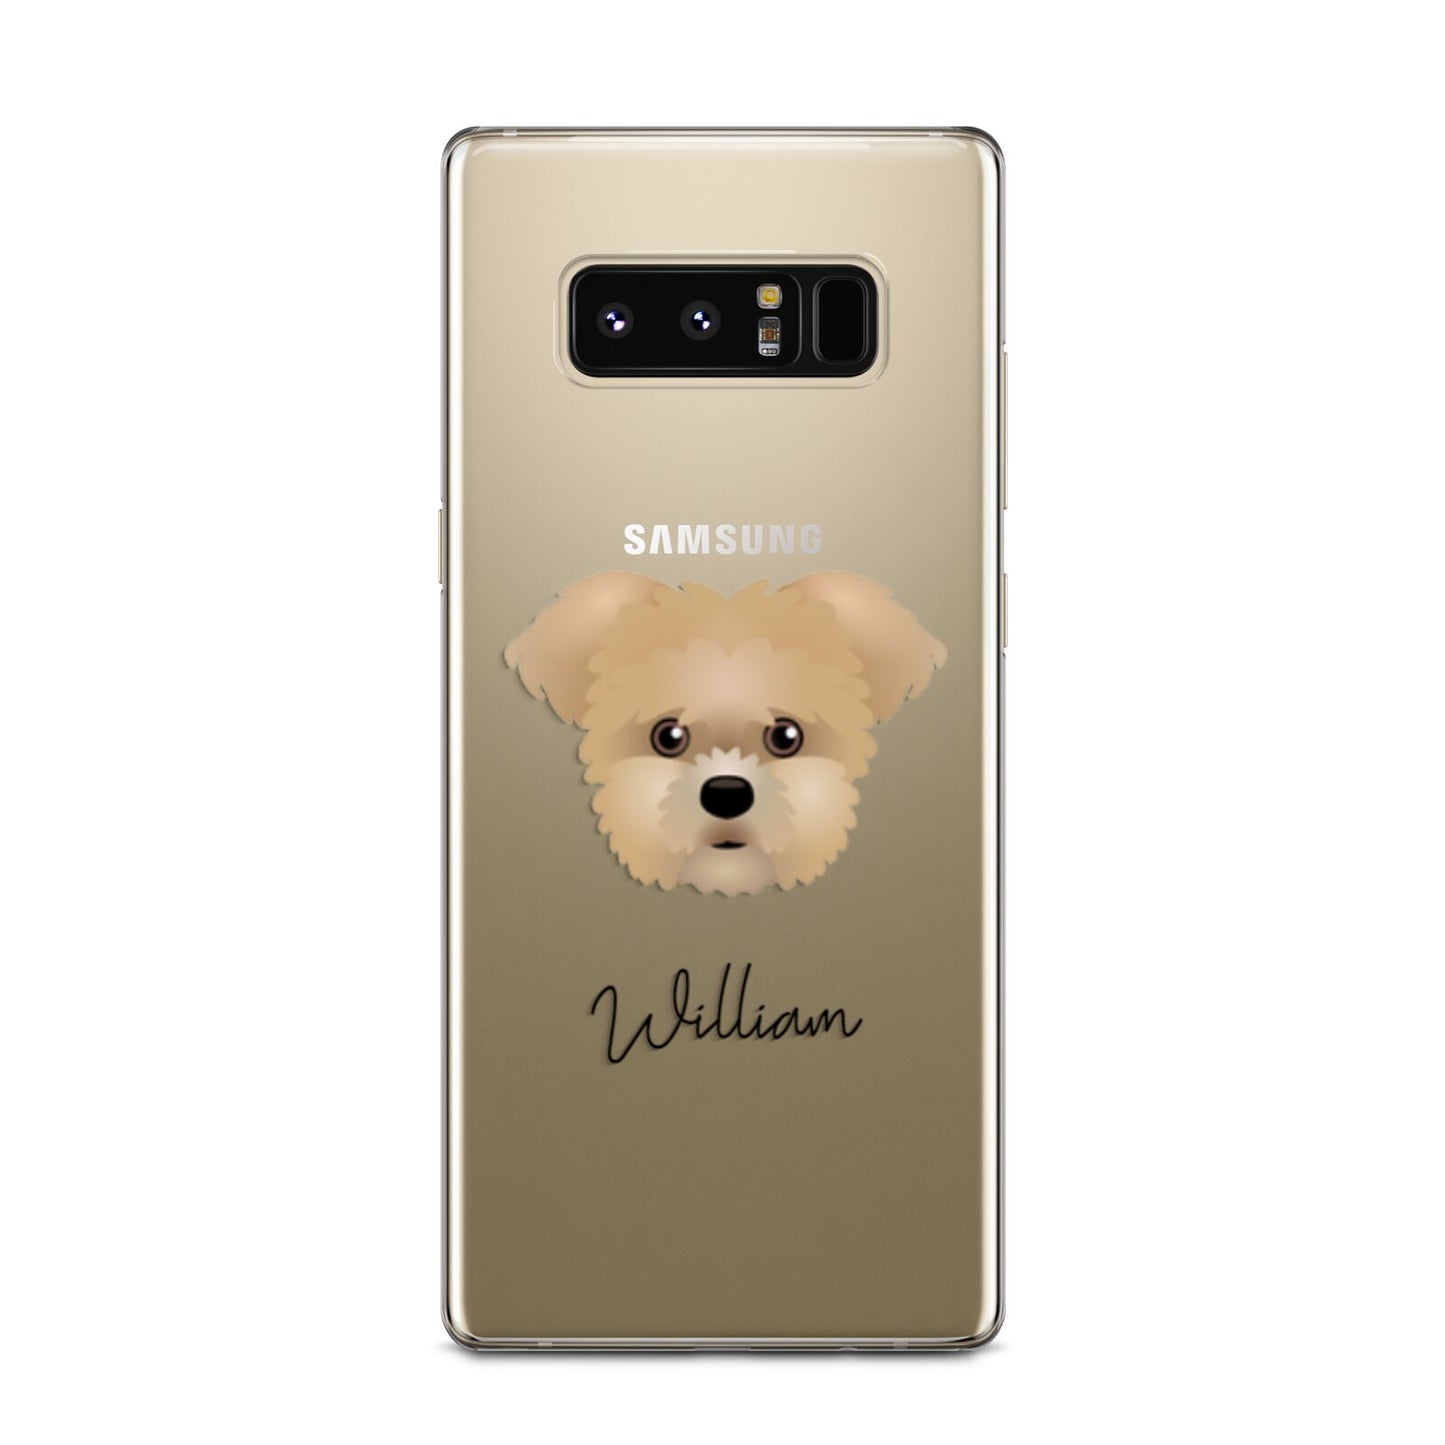 Morkie Personalised Samsung Galaxy Note 8 Case